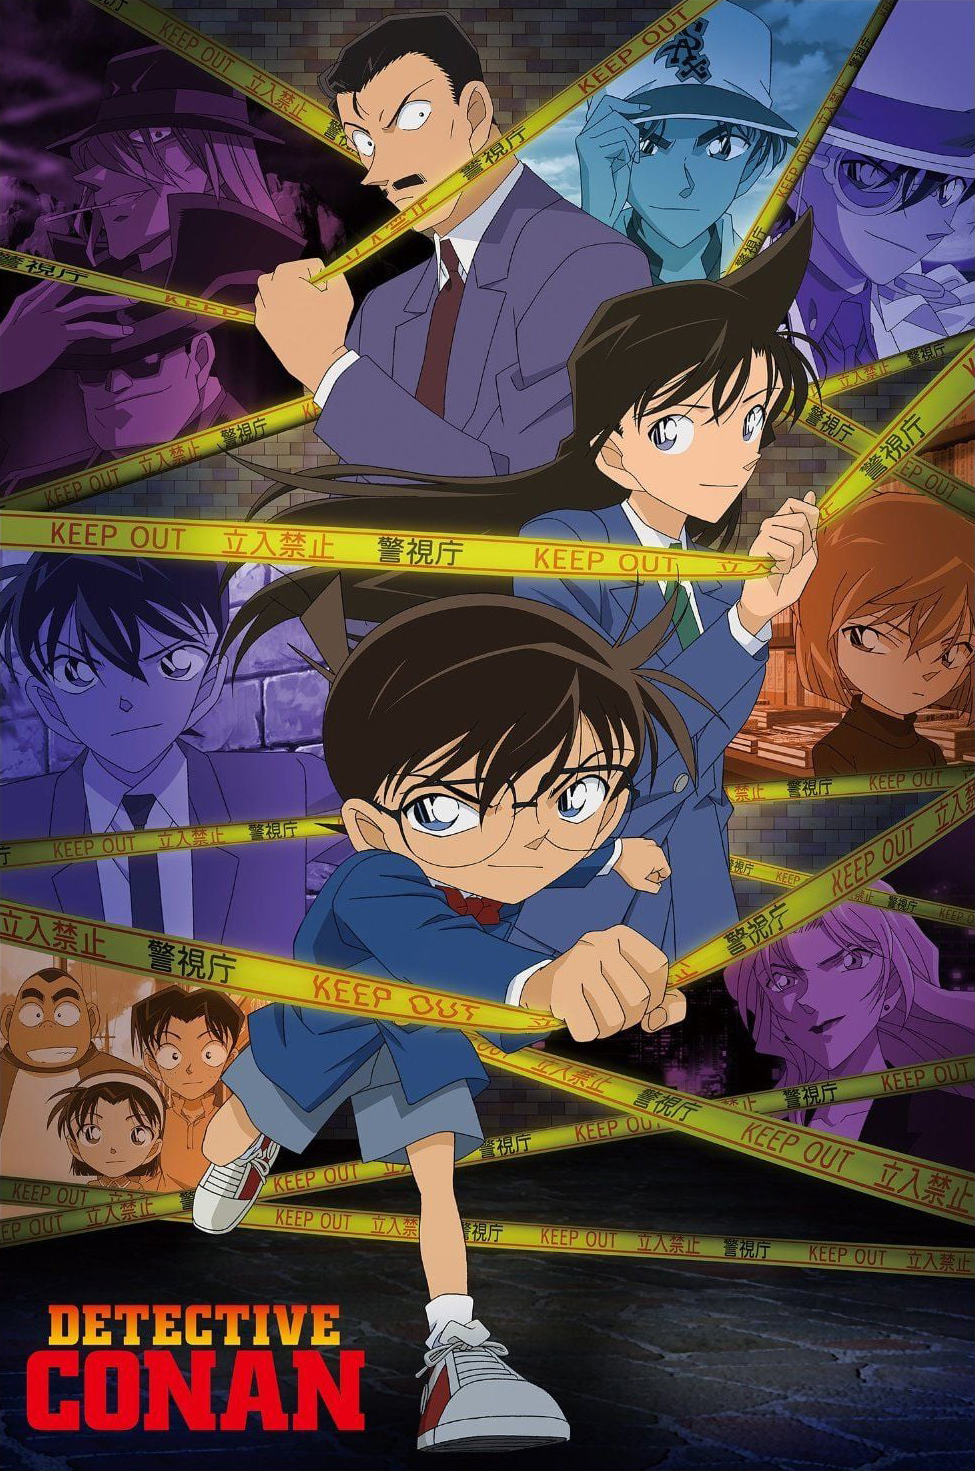 What is the best detective anime that had been dubbed to English, and that  is so similar to the Detective Conan anime? - Quora